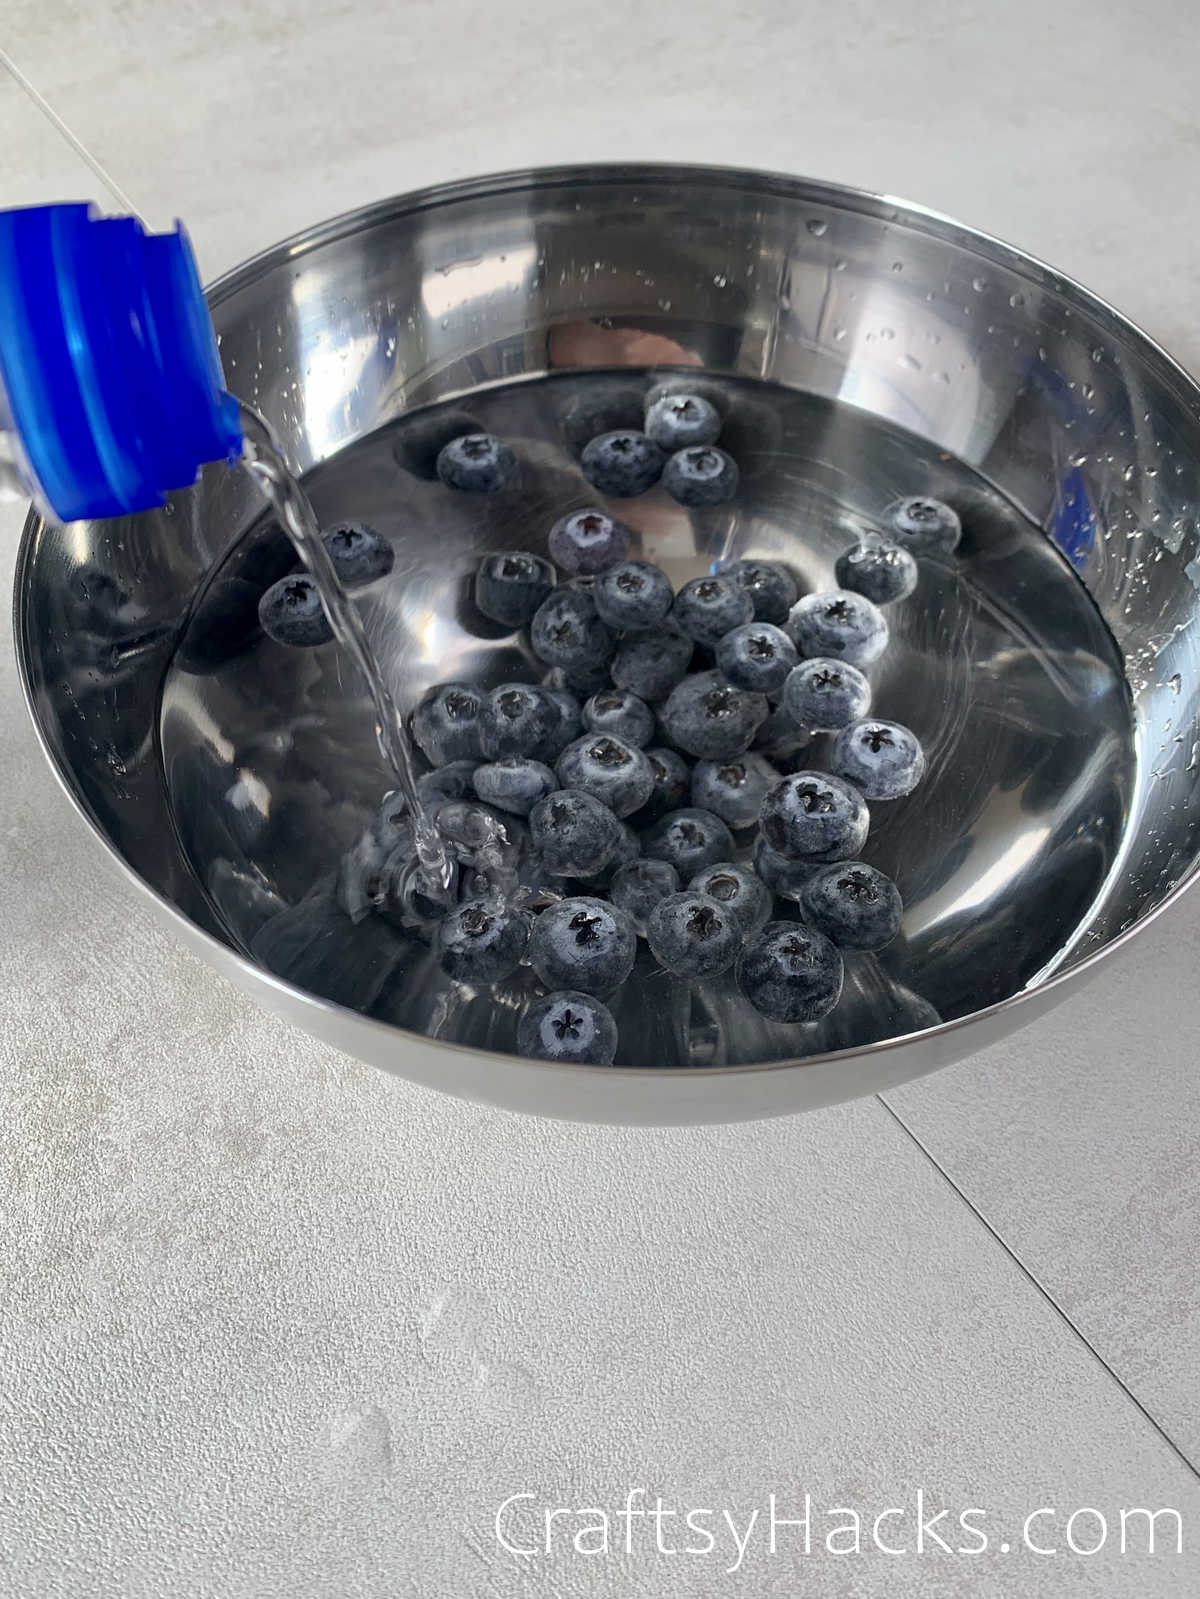 wash blueberries with water and vinegar